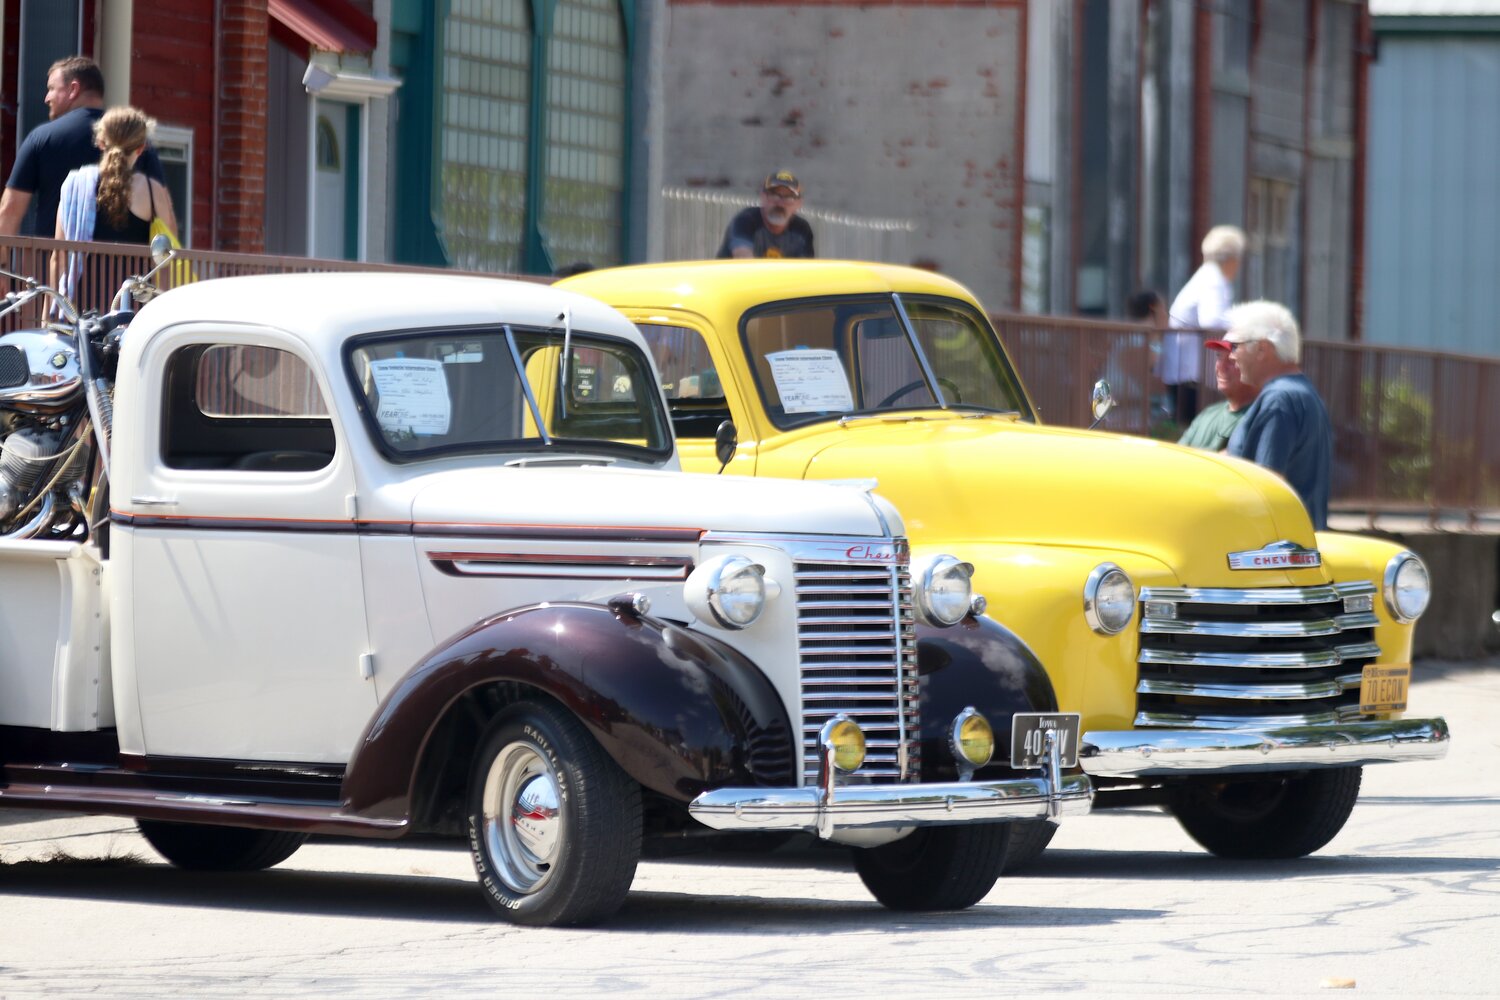 Vintage cars lined the streets of Lone Tree as well, providing eye candy to those at the Fall Festival.